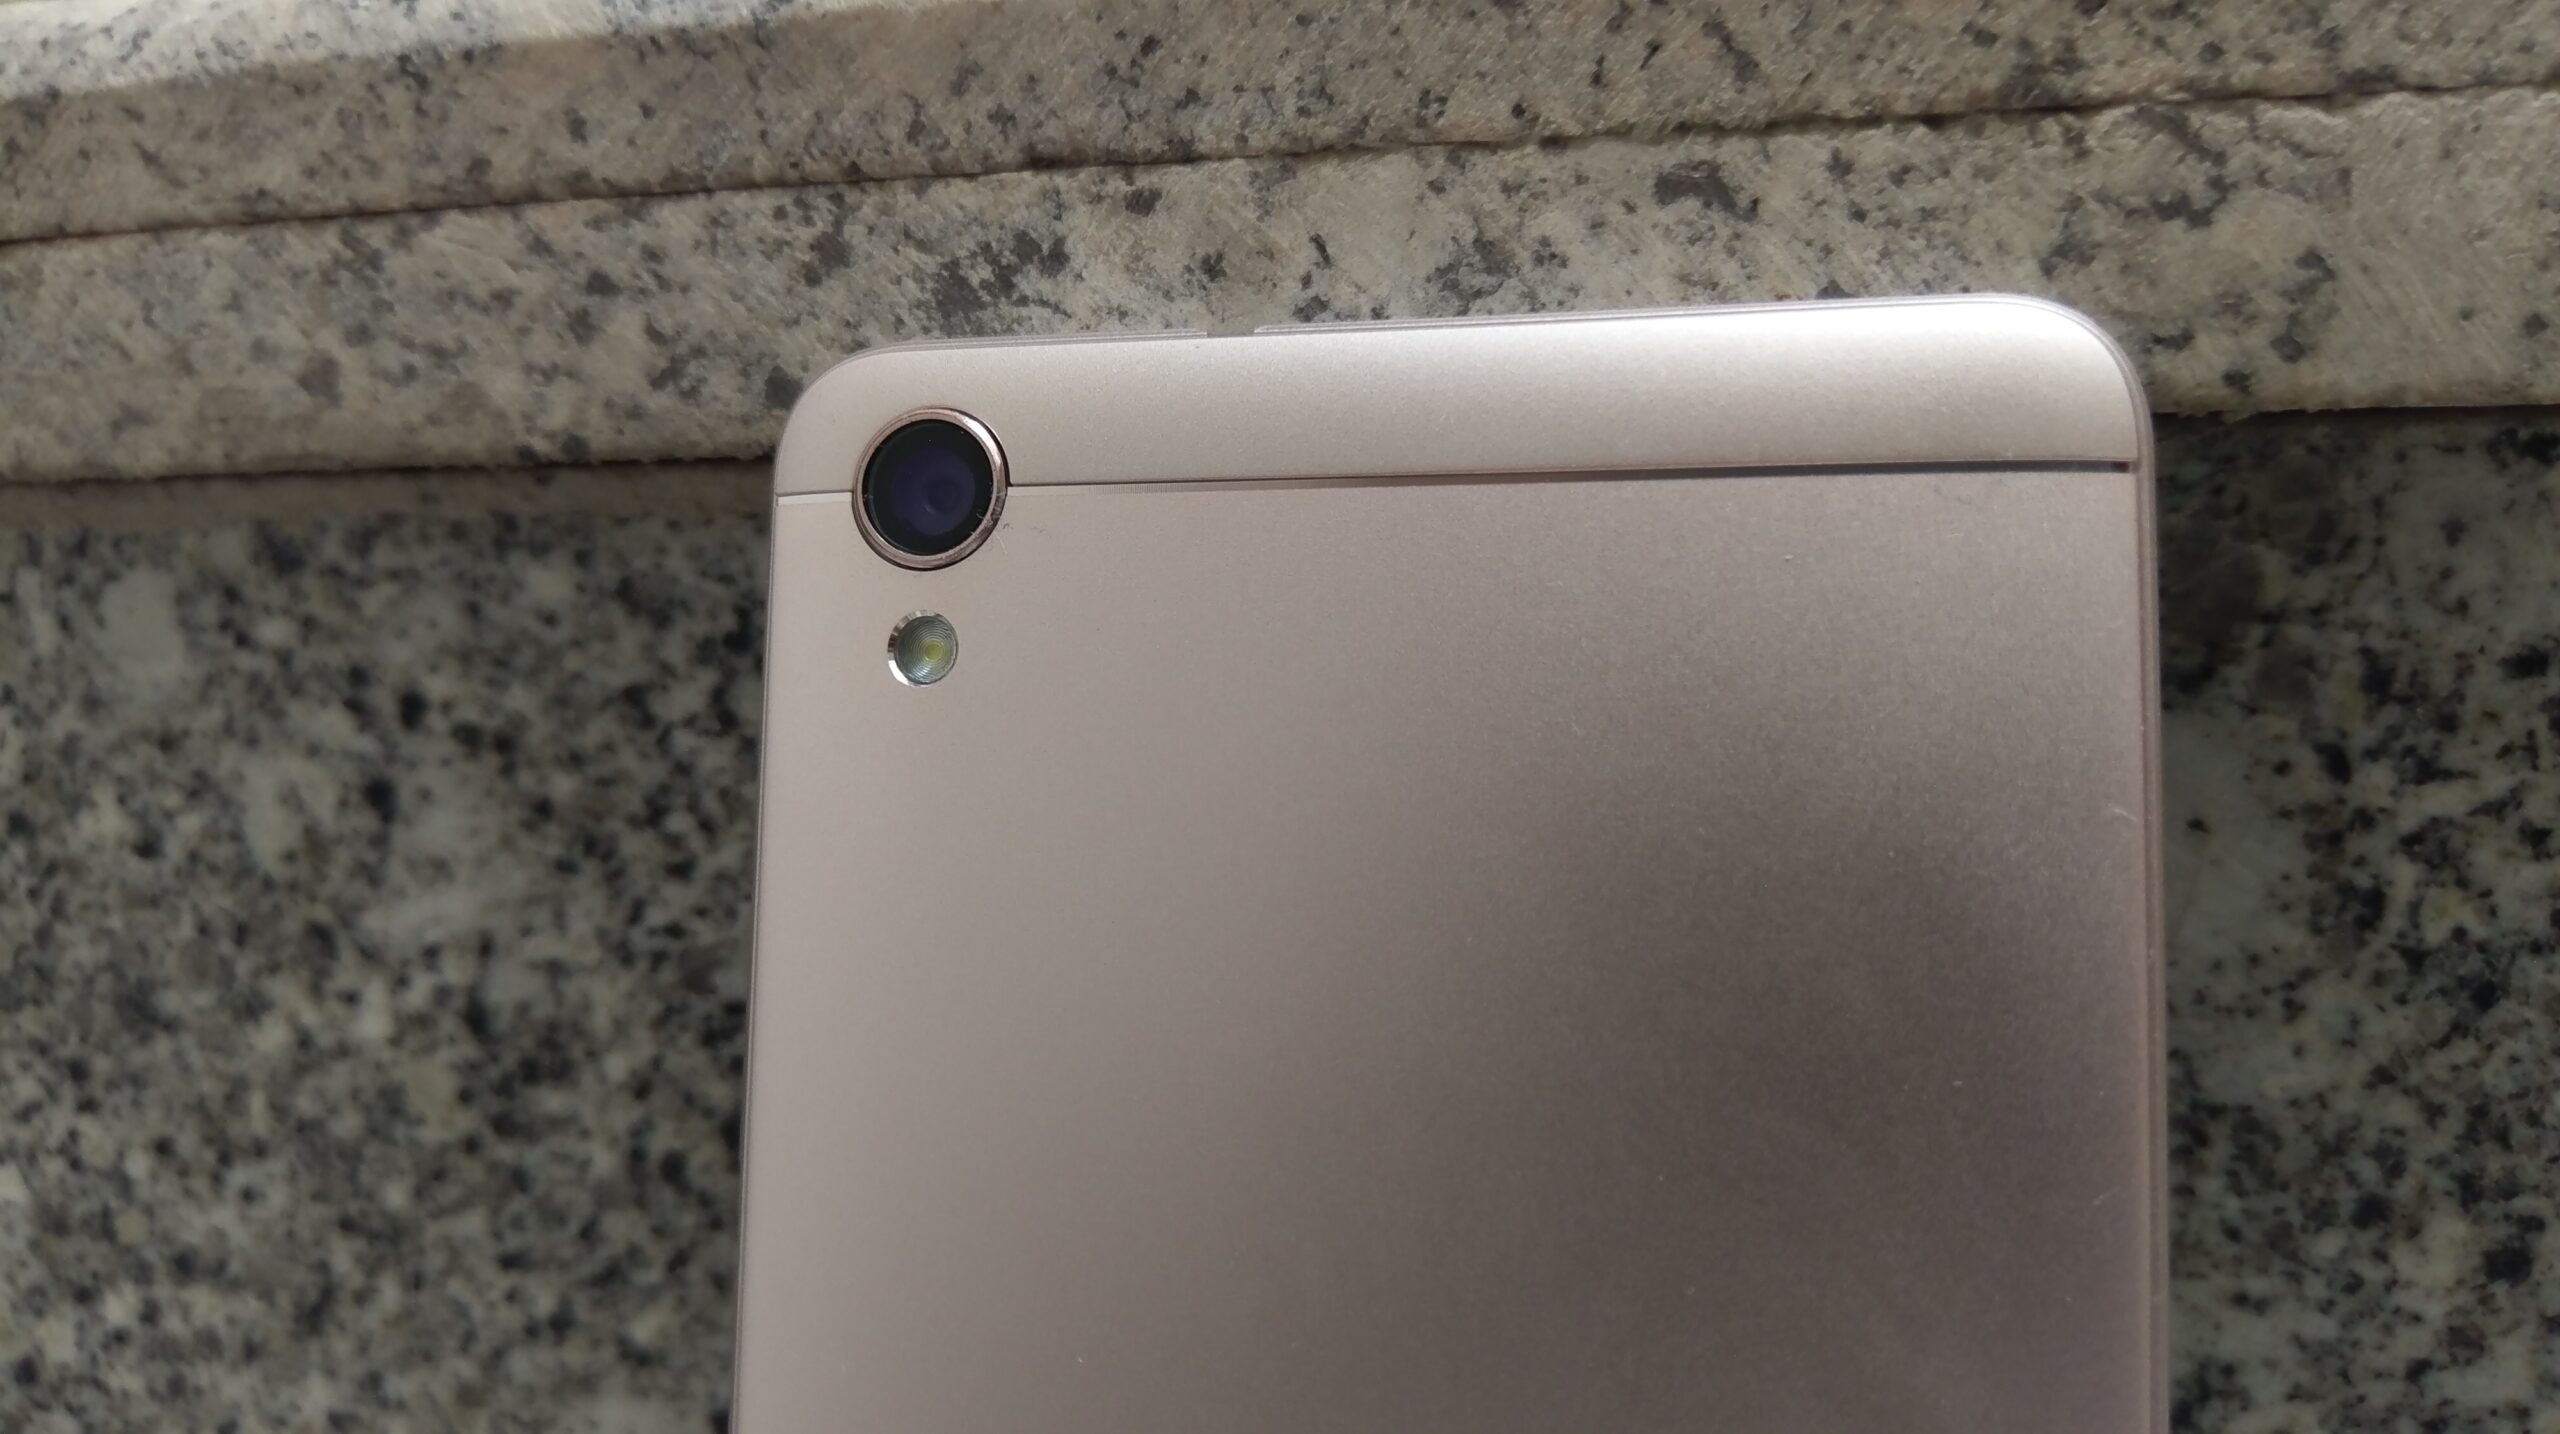 Lava Z10 in Pictures